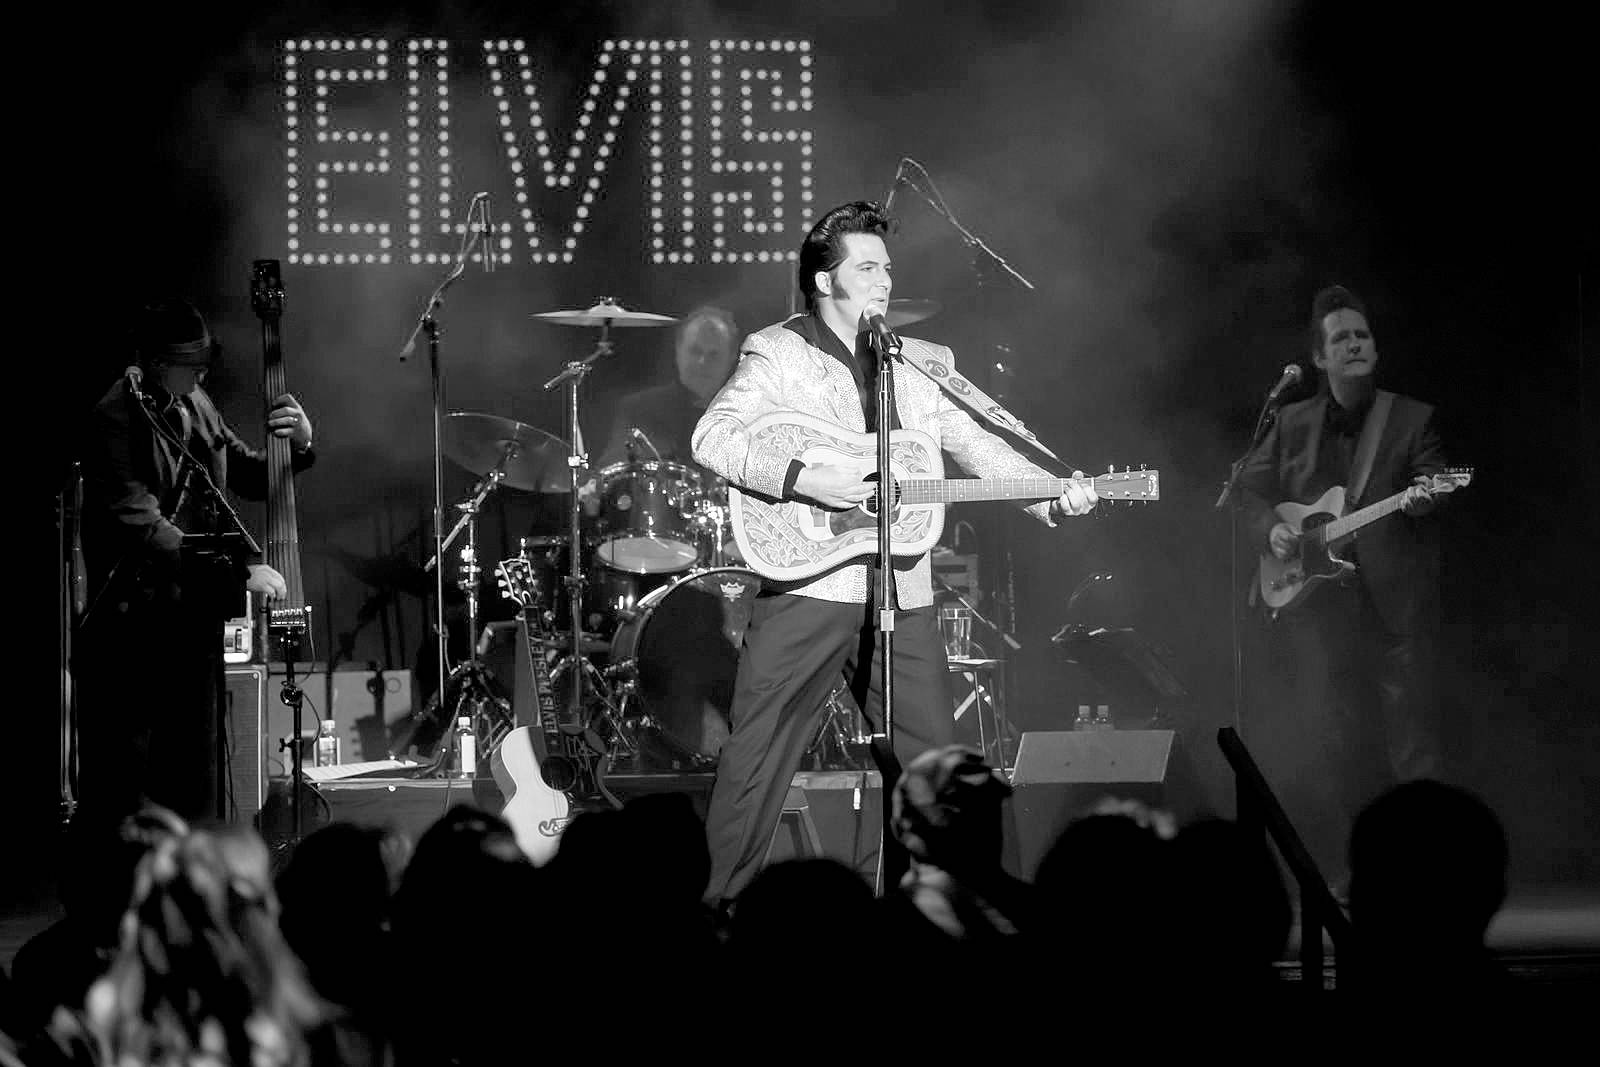 Elvis impersonator Danny Vernon will perform at The Clearwater Casino on New Year’s Eve afternoon.